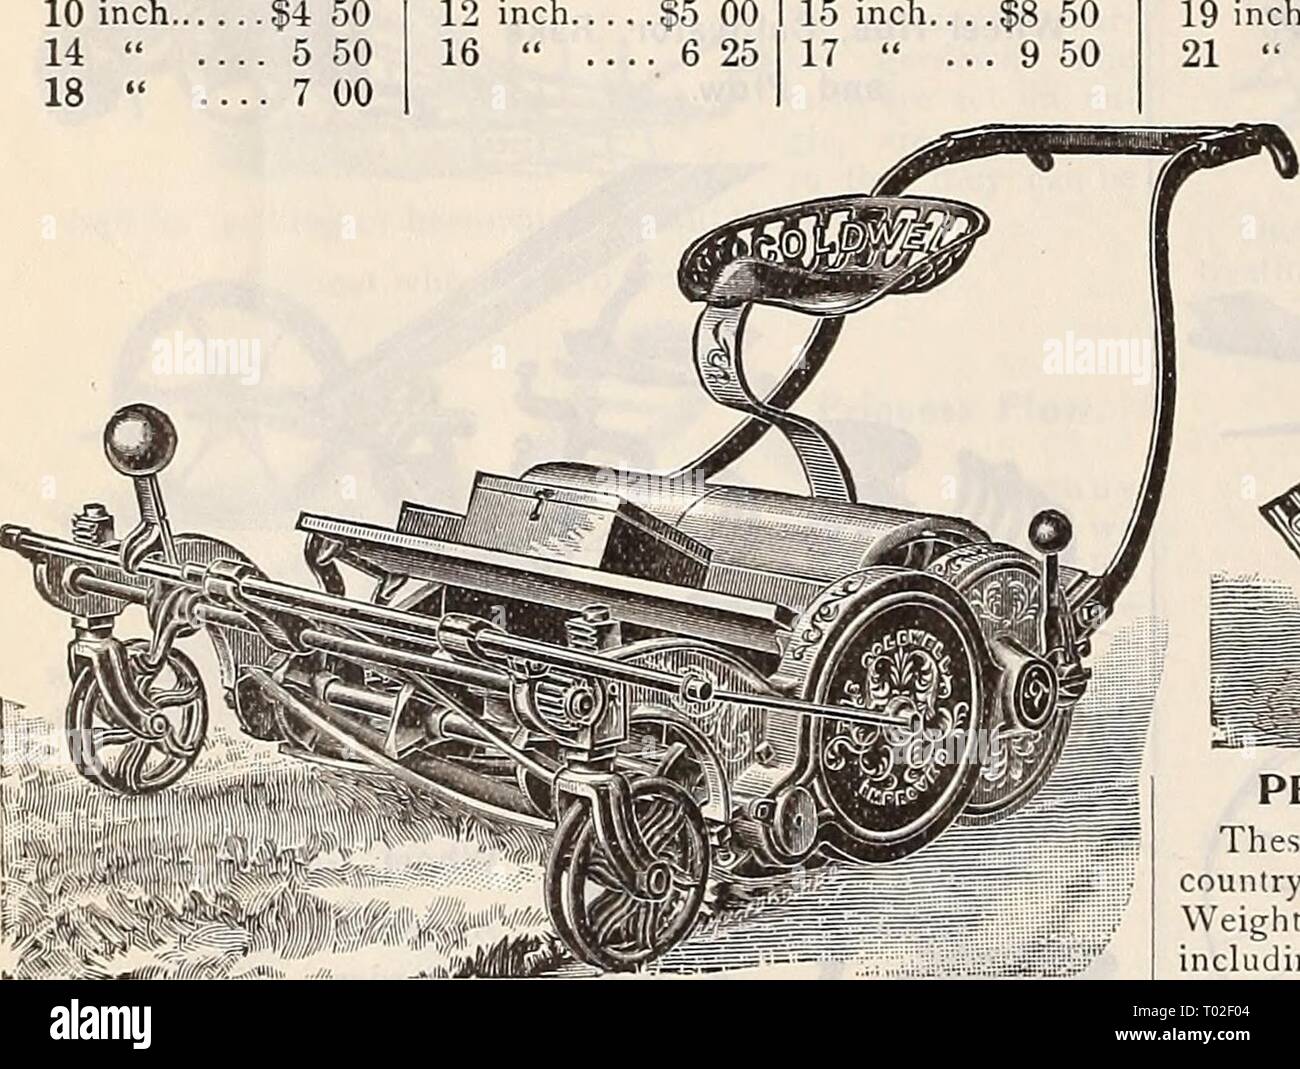 Dreer's garden calendar : 1898 . dreersgardencale1898henr Year: 1898  THE DREER Low Wheel Mower. Identical in eveiy way to the DREER High Wheel Mower, butwith8J-inch driving wheels and-with 4 blades; the iesi mower for the small and medium sized lawn. 12-inch cut. Price, $5 50 net. 14 ' ' ' 6 50 ' 16 ' ' ' 7 50 ' 18 ' ' ' 8 50 ' Continental and Pennsylvania. LOW WHEEL. I HIGH WHEEL. Philadelphia Mower. 10 inch. 14 ' 18 ' .84 50 . 5 50 . 7 00 12 inch §5 00 I 15 inch.., 16 ' .... 6 25 I 17 ' .. §8 50 9 50    19 inch.. $10 50 21 ' .. 11 50 10 inch 84 50 12 ' 5 00 14 ' .... 5 50 16 inch. 18 ' .$6  Stock Photo